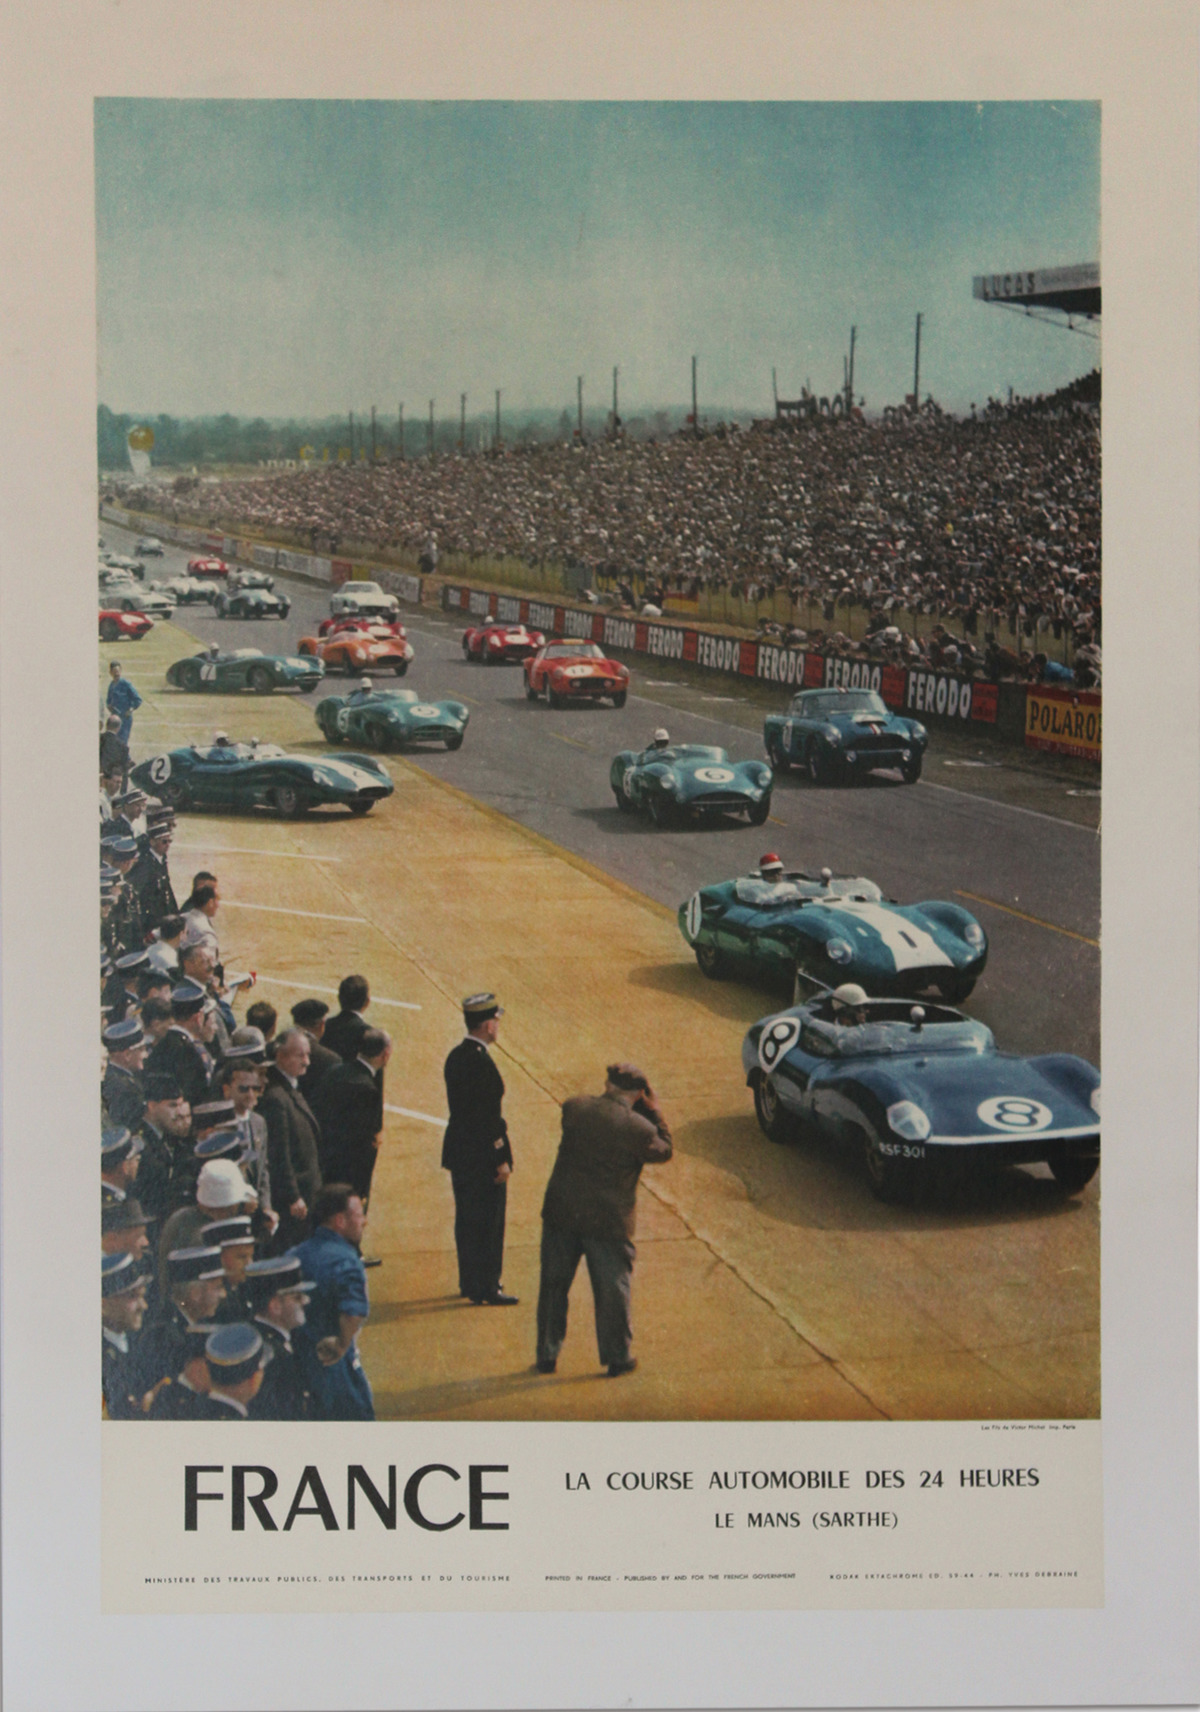 France La Course Automobile des 24 Heures Le Mans (Sarthe) Poster 1967 offered in RM Sotheby's The Art of Competition 2020